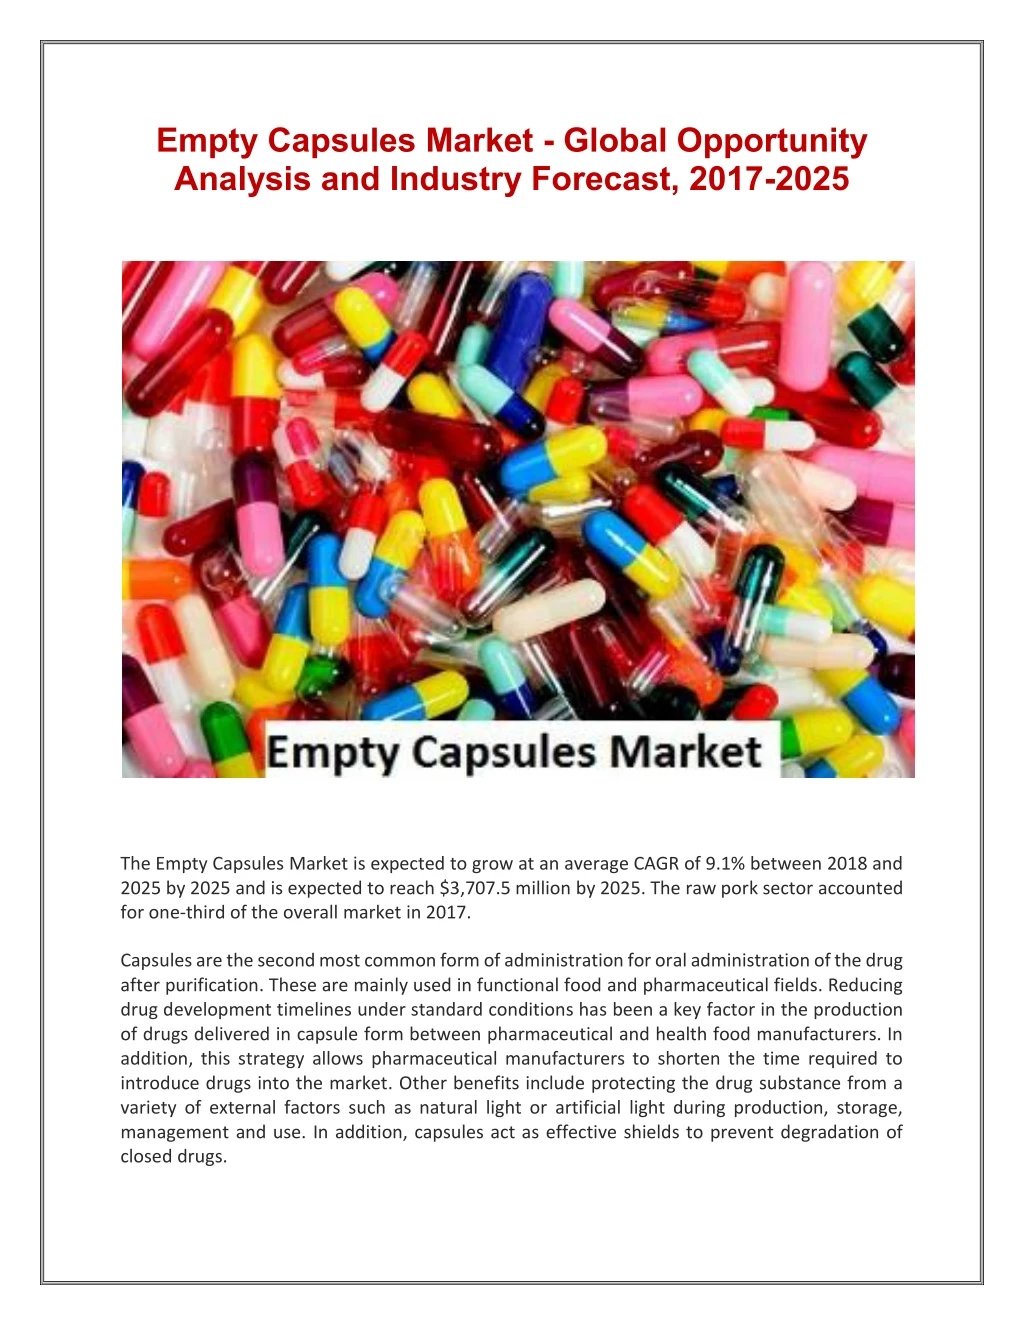 empty capsules market global opportunity analysis